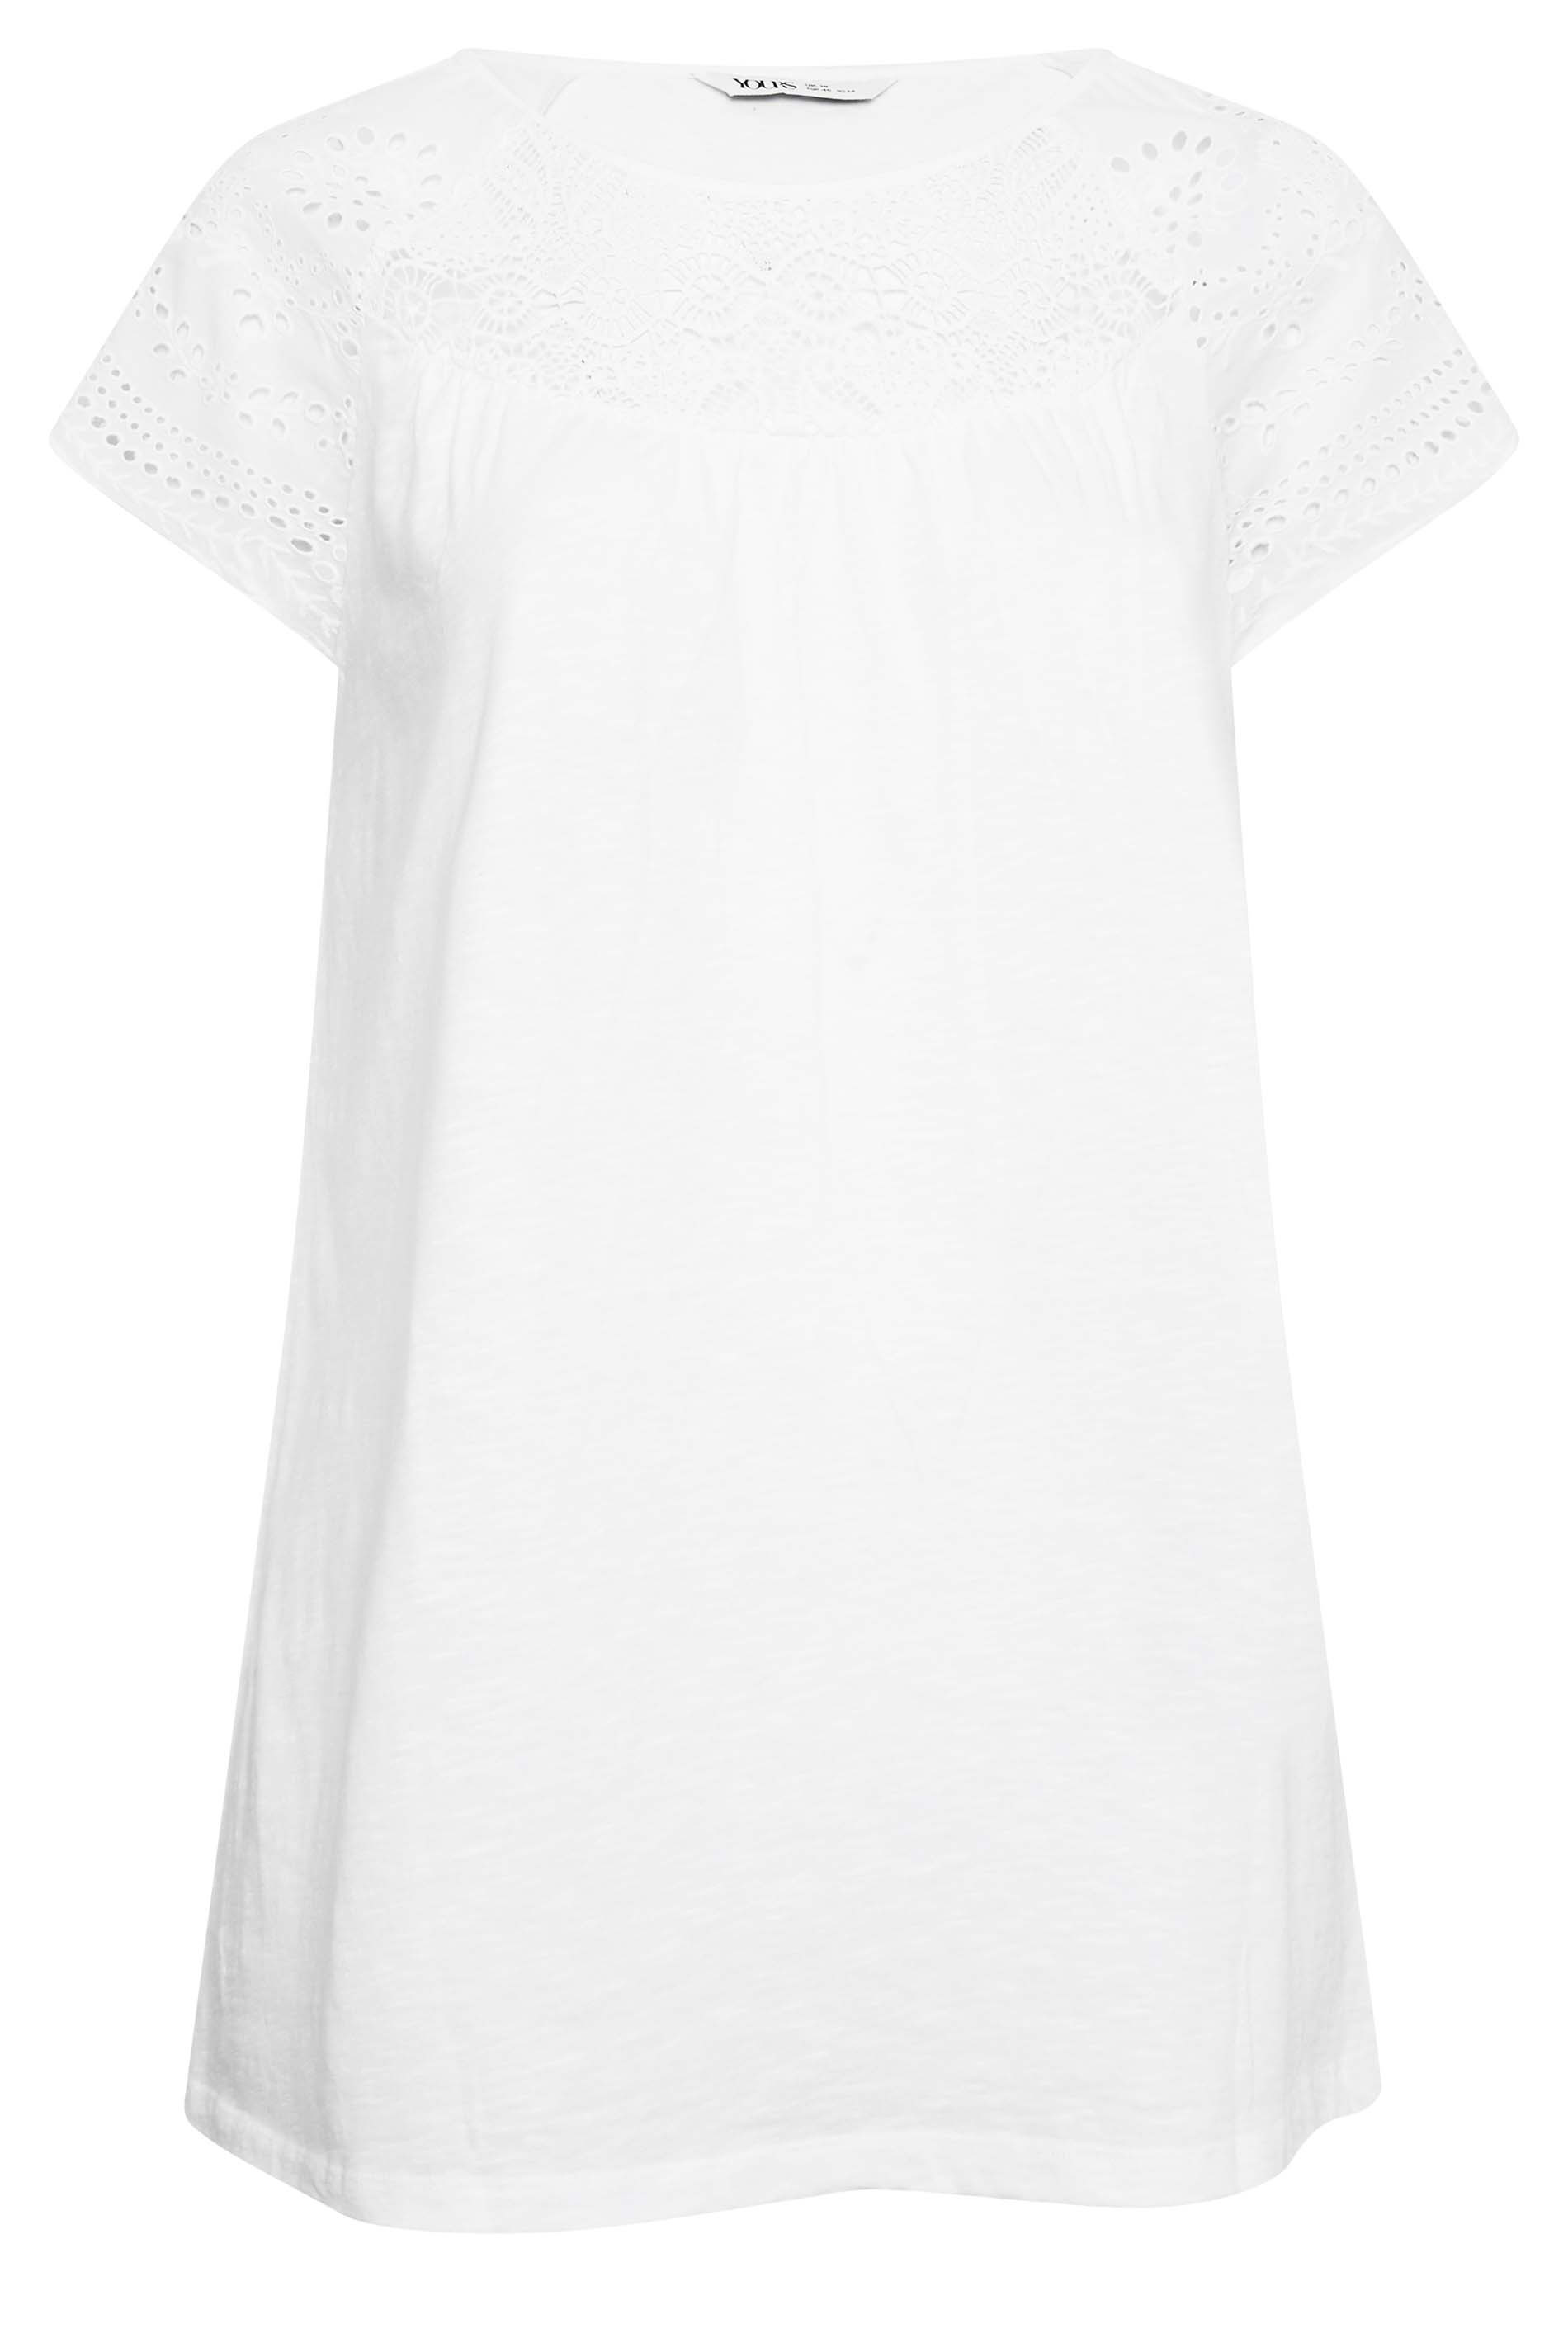 YOURS Plus Size White Crochet Lace Top | Yours Clothing